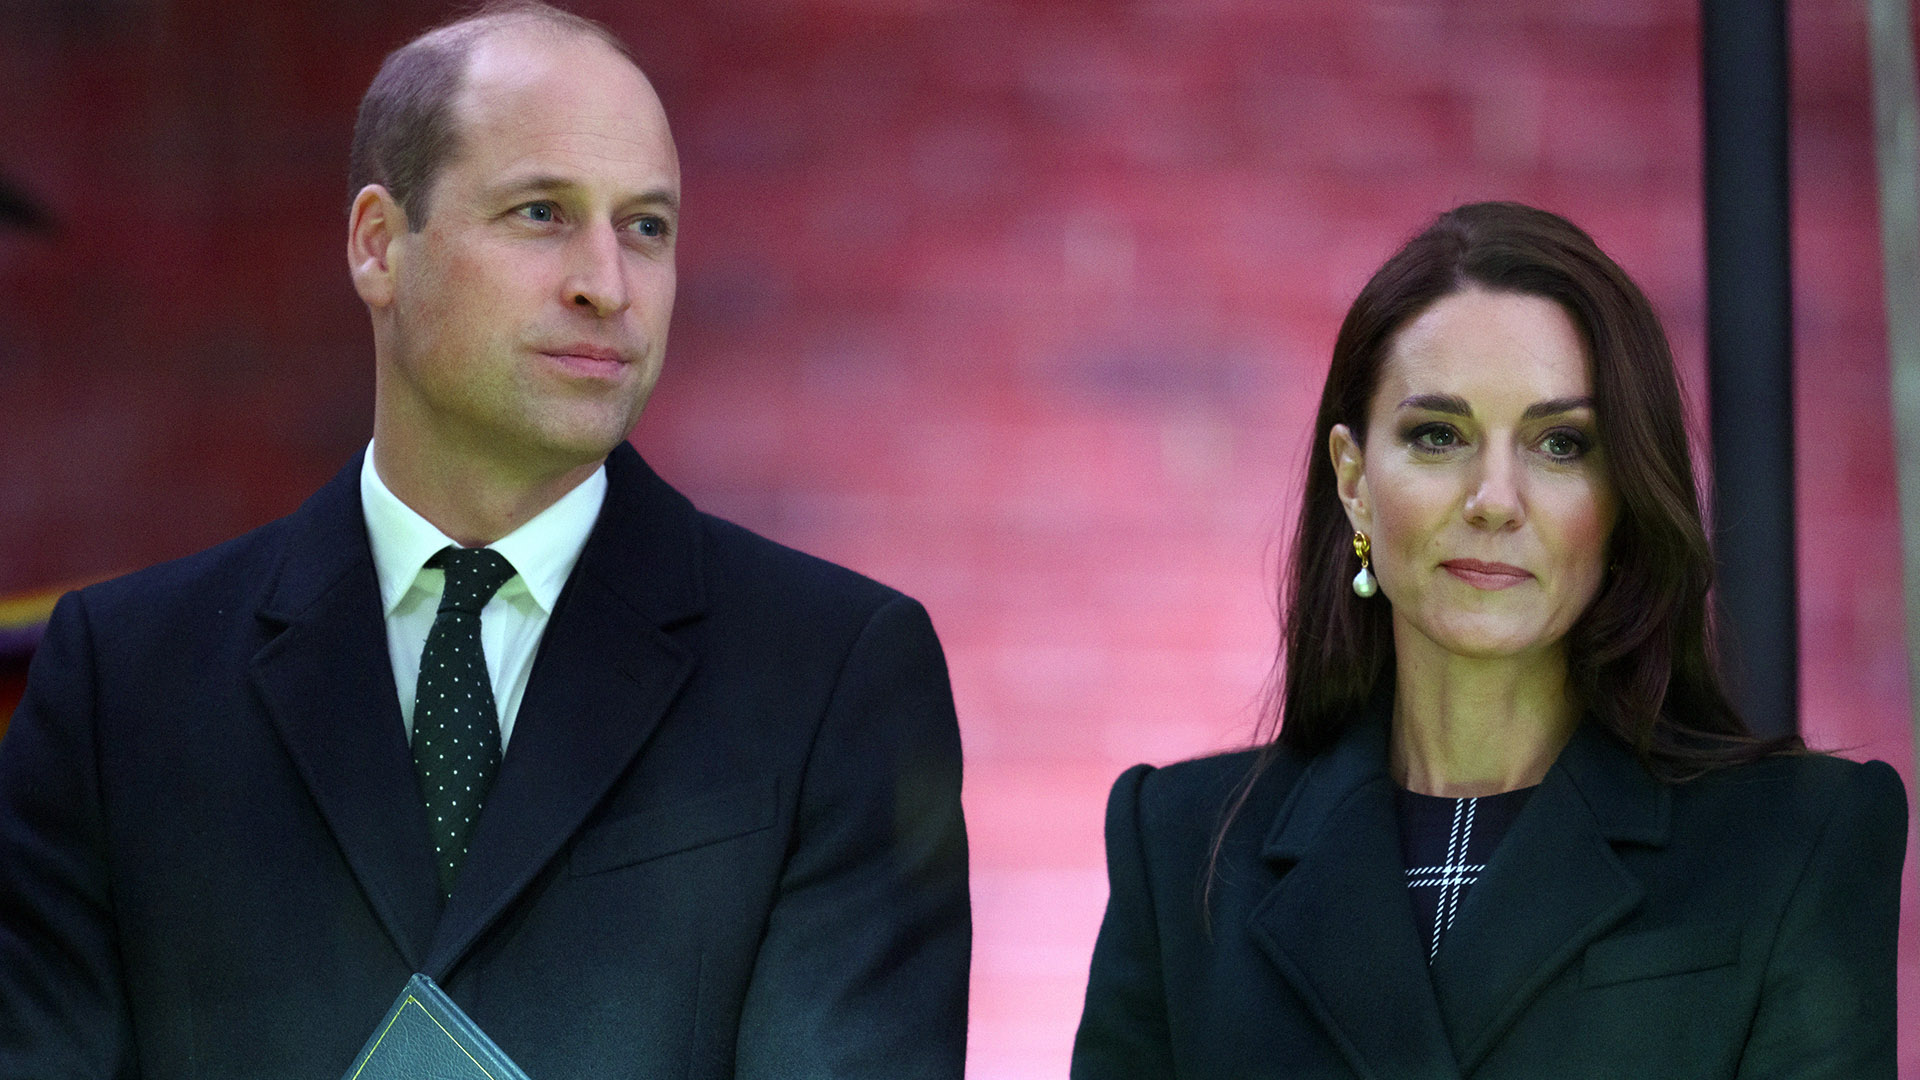 Why Didn't Kate Middleton Change Her Last Name After Marrying Prince William?